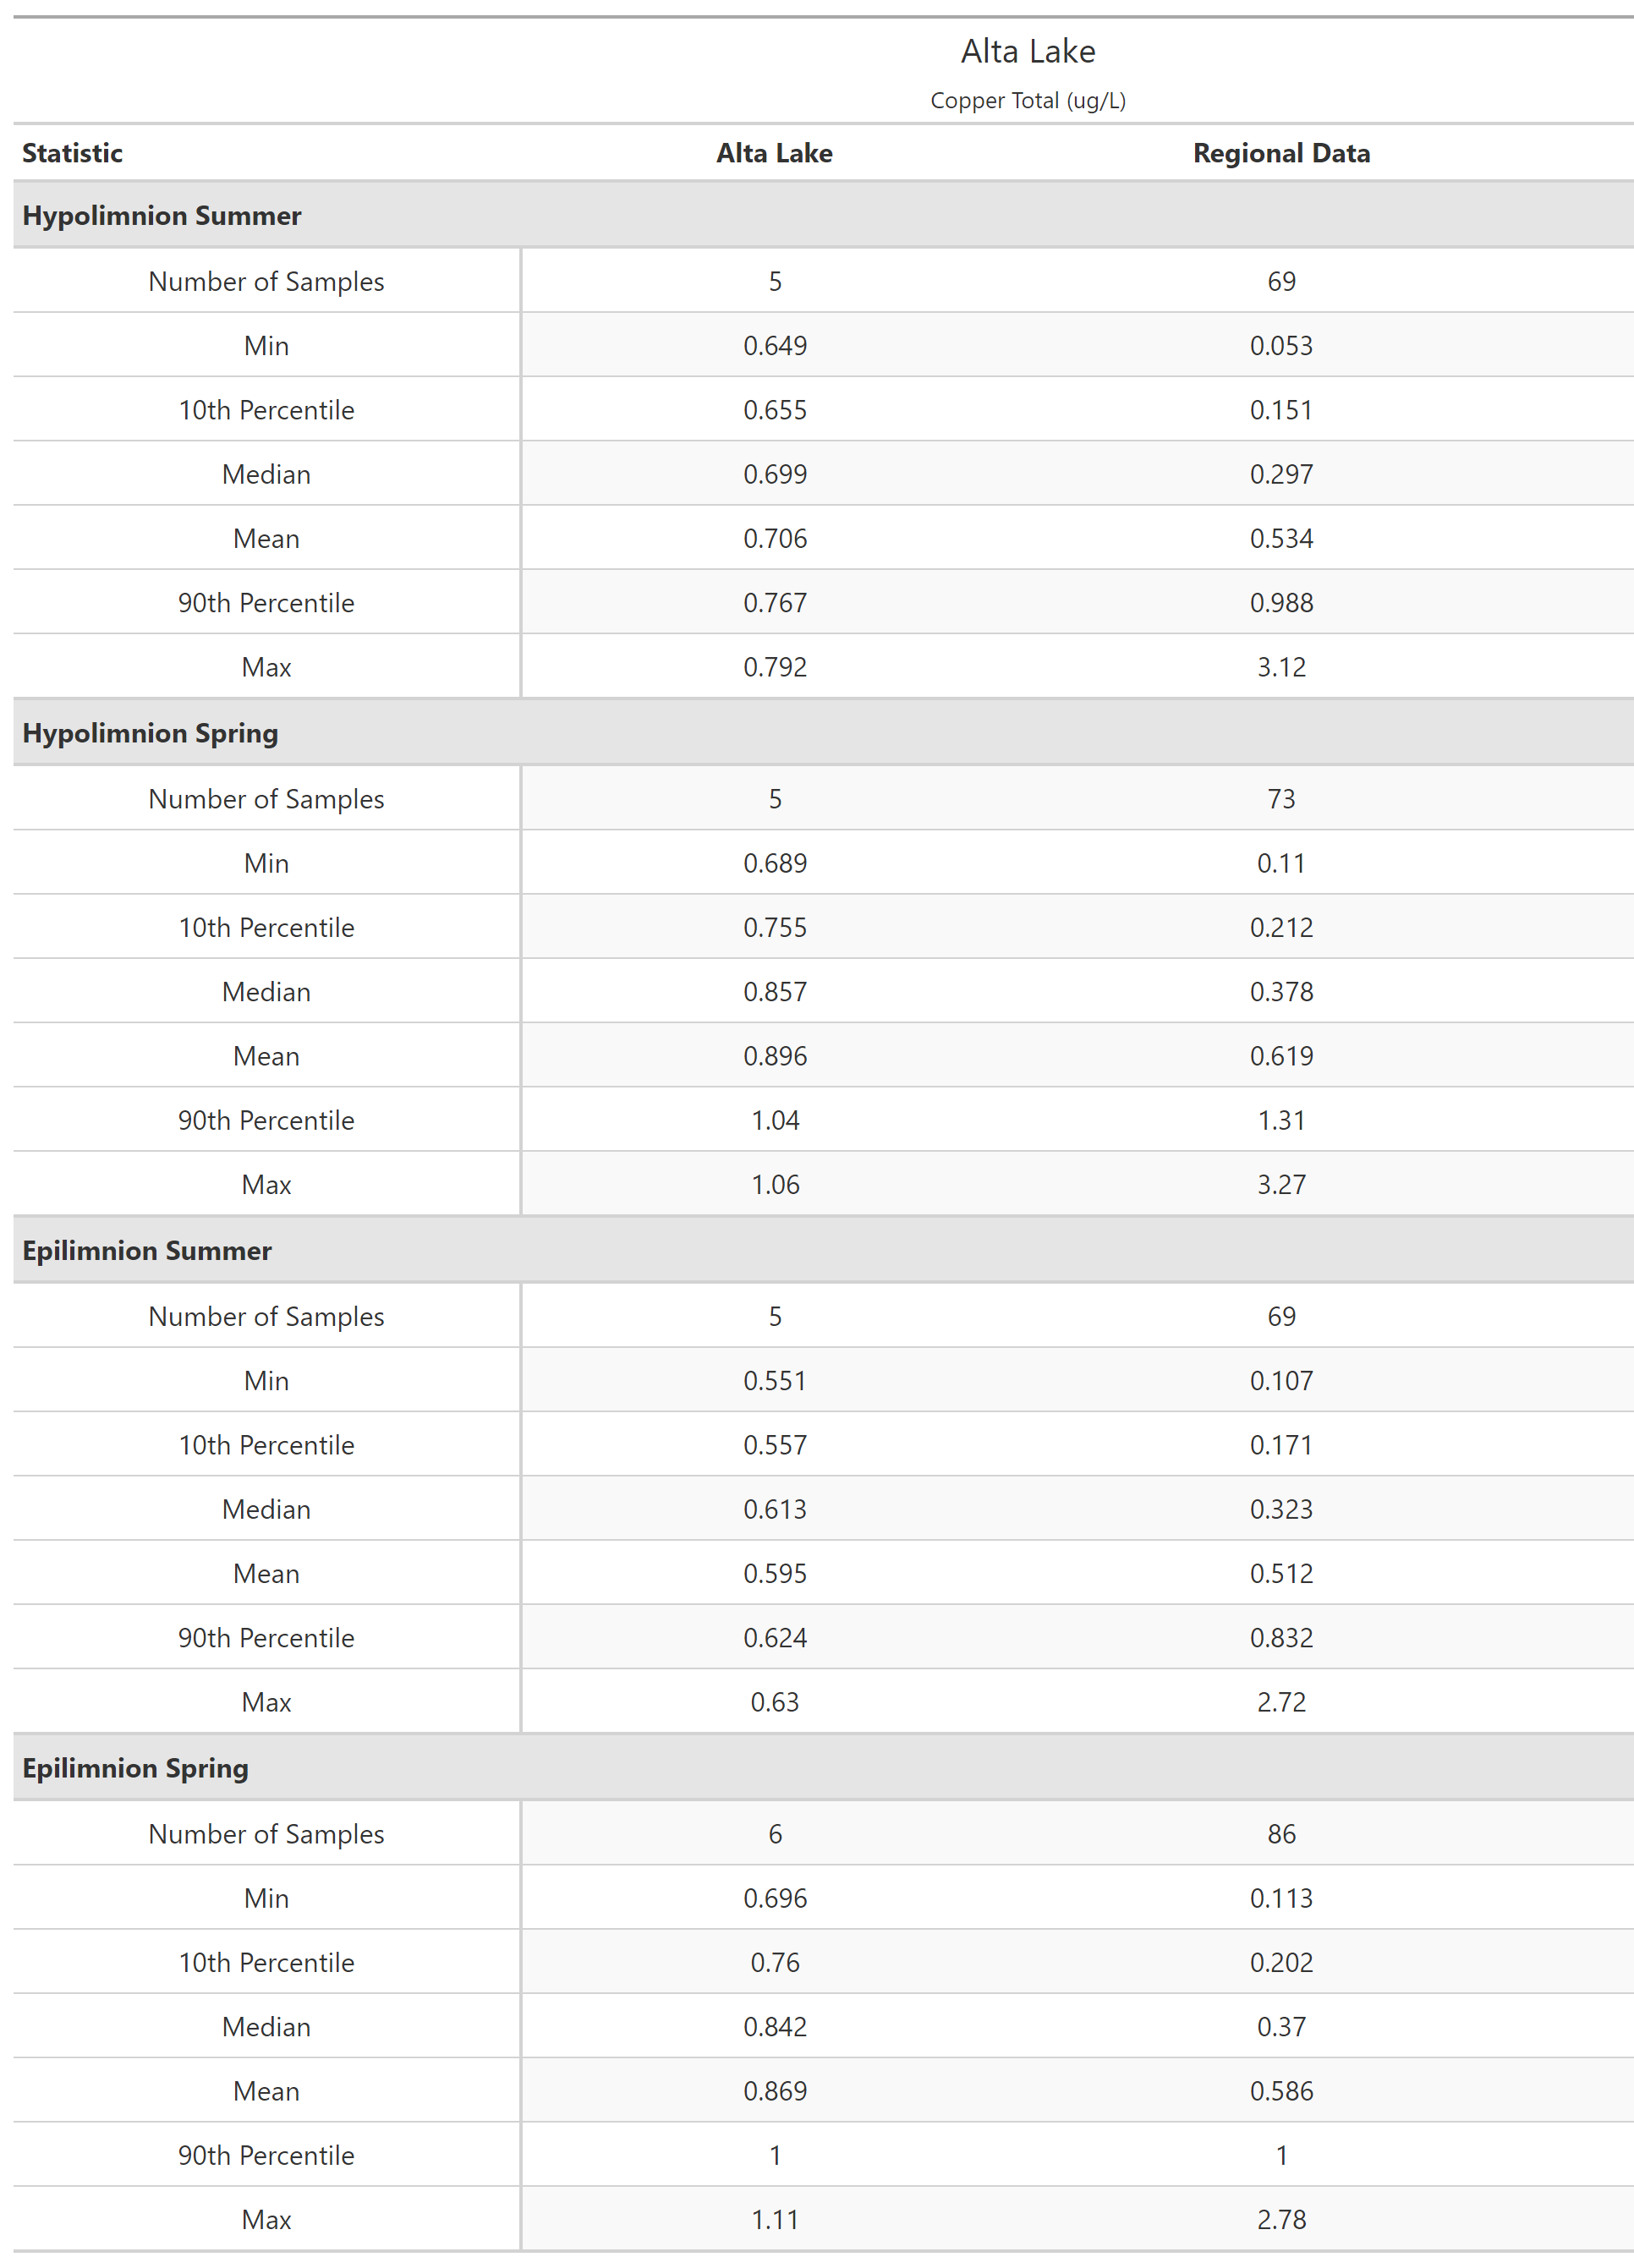 A table of summary statistics for Copper Total with comparison to regional data